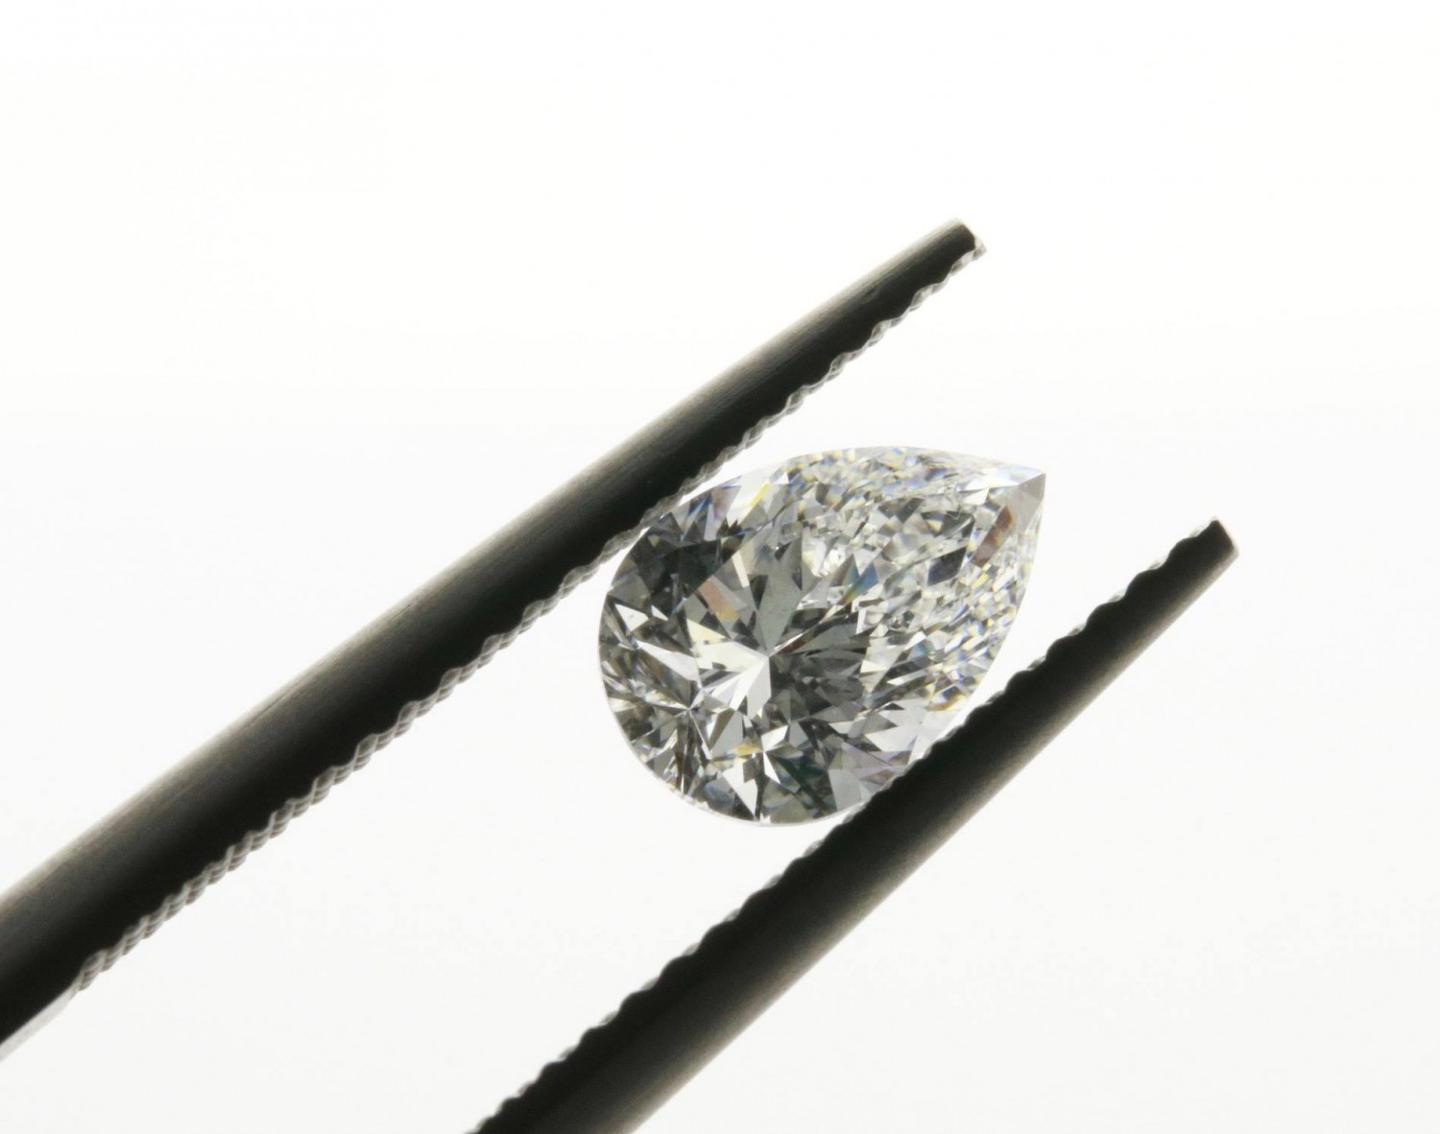 3 reasons for investing in diamonds